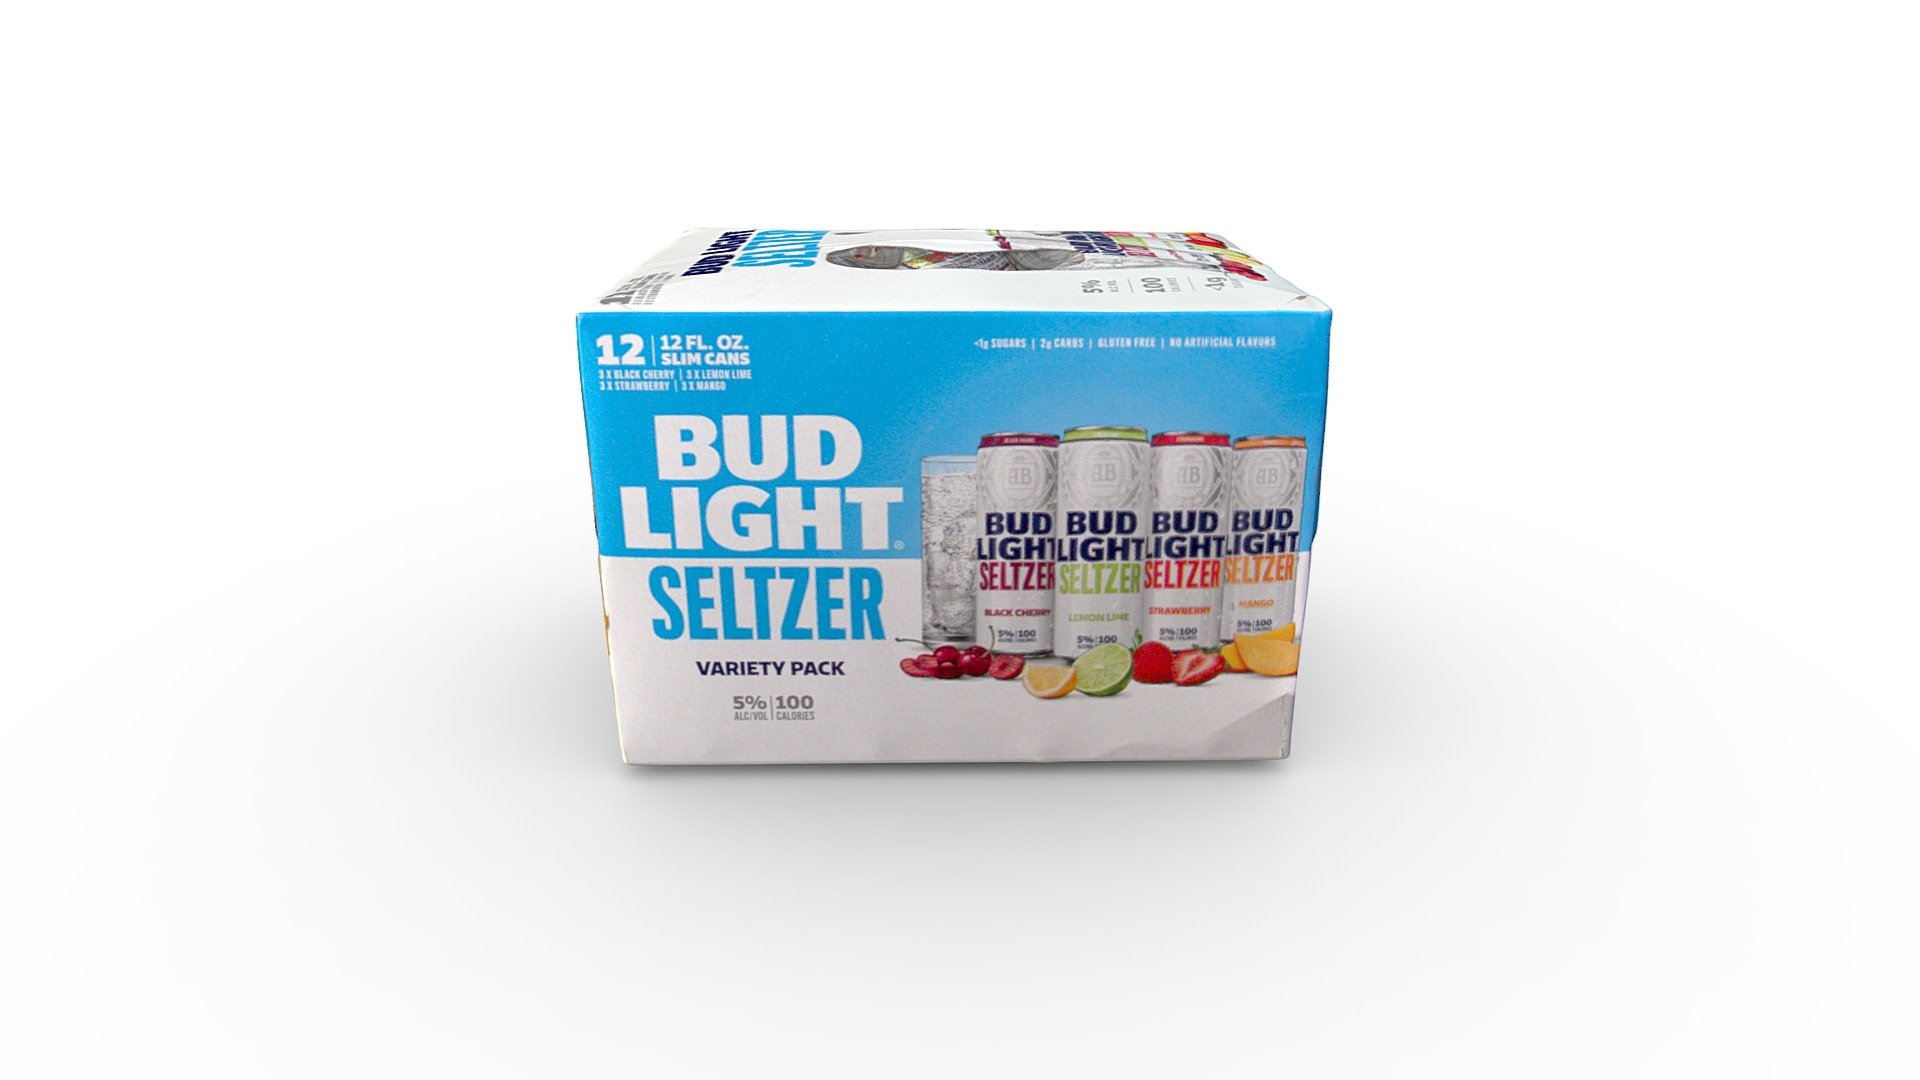 3D Scan of a 12 Pack of Bud Light Seltzers

Introducing Bud Light Seltzer: An easy-drinking hard seltzer with a hint of delicious fruit flavor. Bud Light makes their hard seltzer with a unique process made to deliver the most refreshing taste possible 3d model